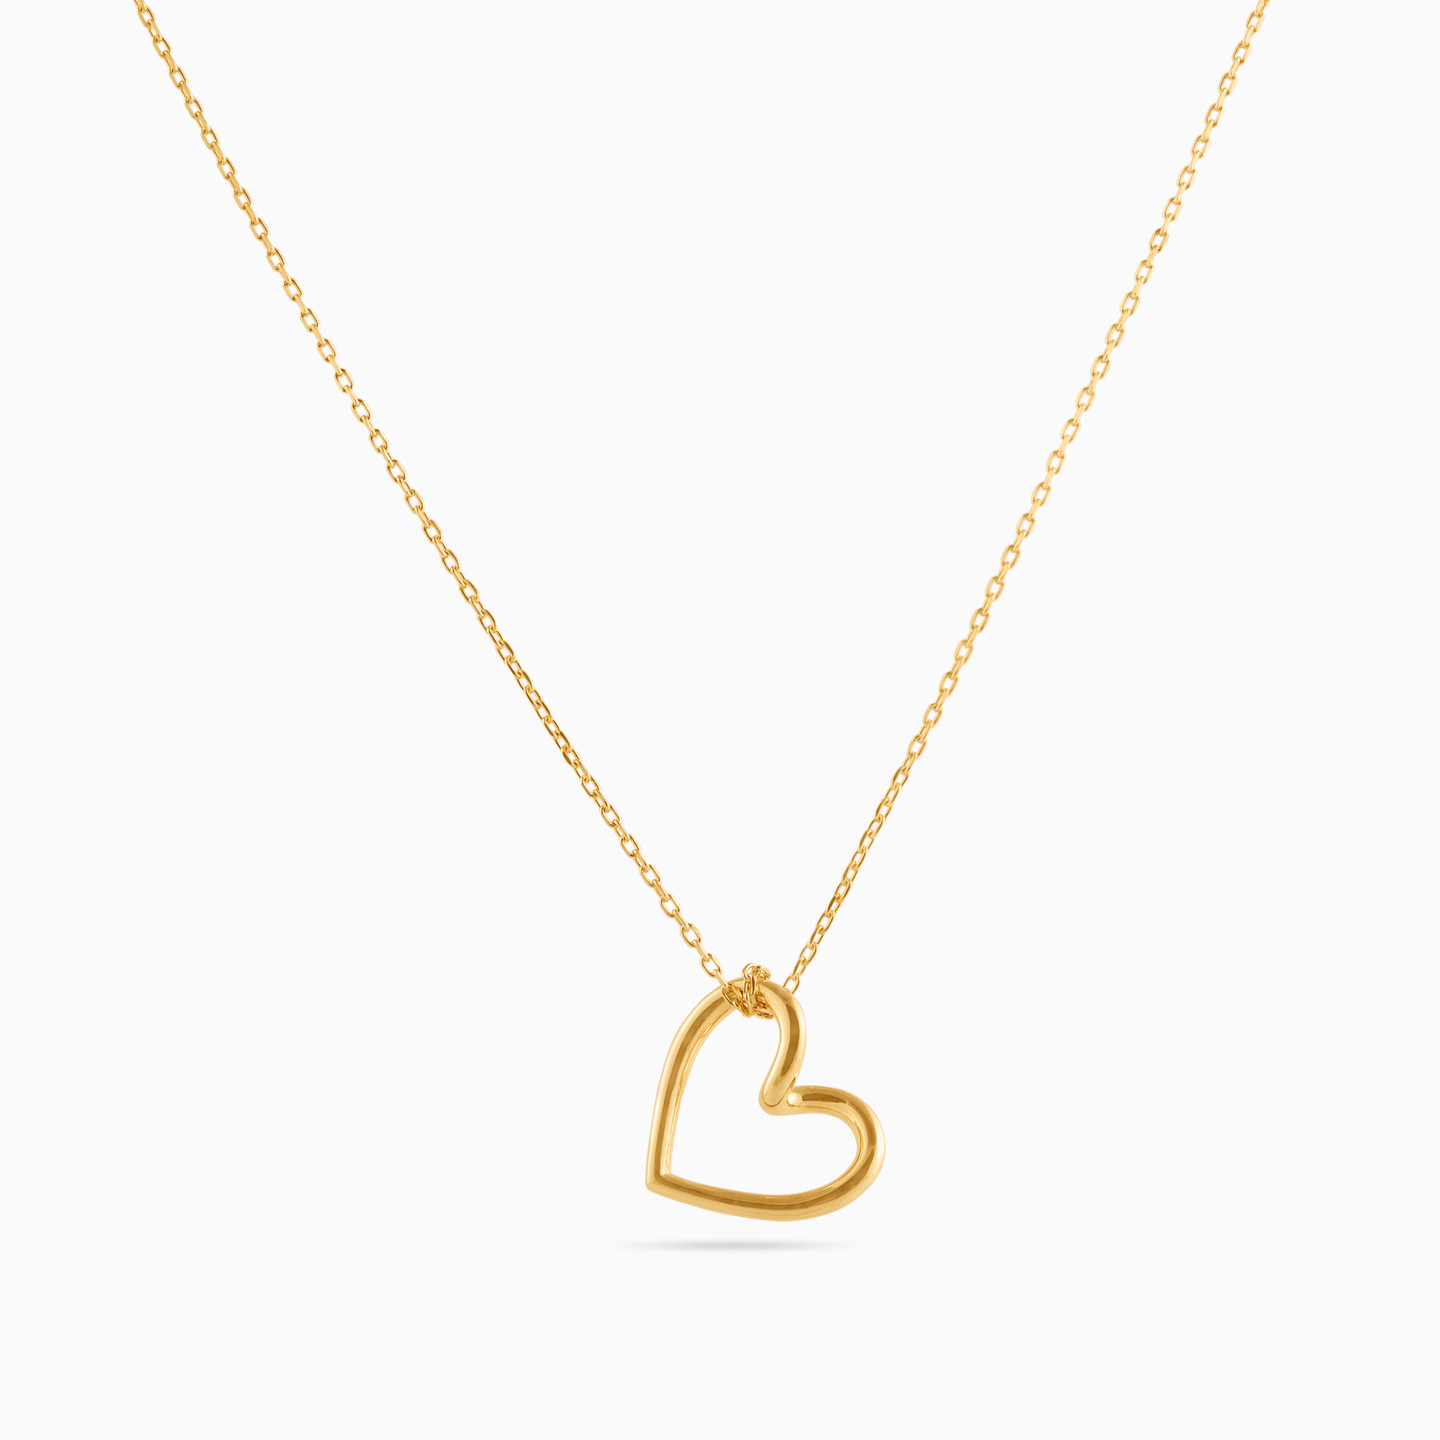 Gold Plated Pendant Necklace - 3